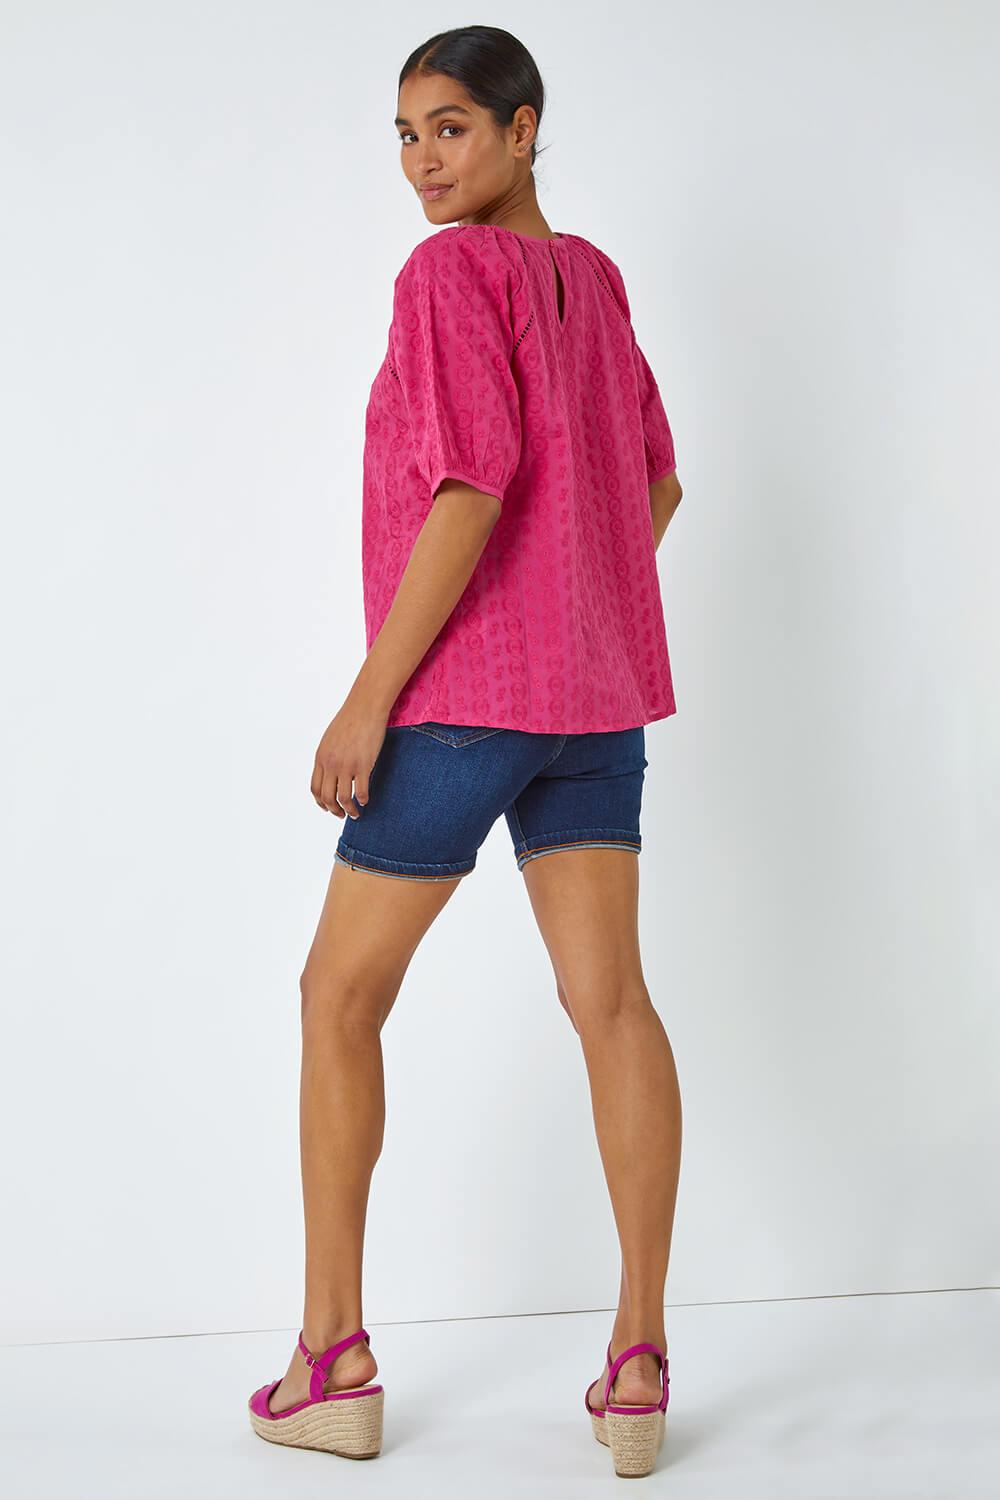 PINK Broderie Puff Sleeve Cotton Top, Image 3 of 5